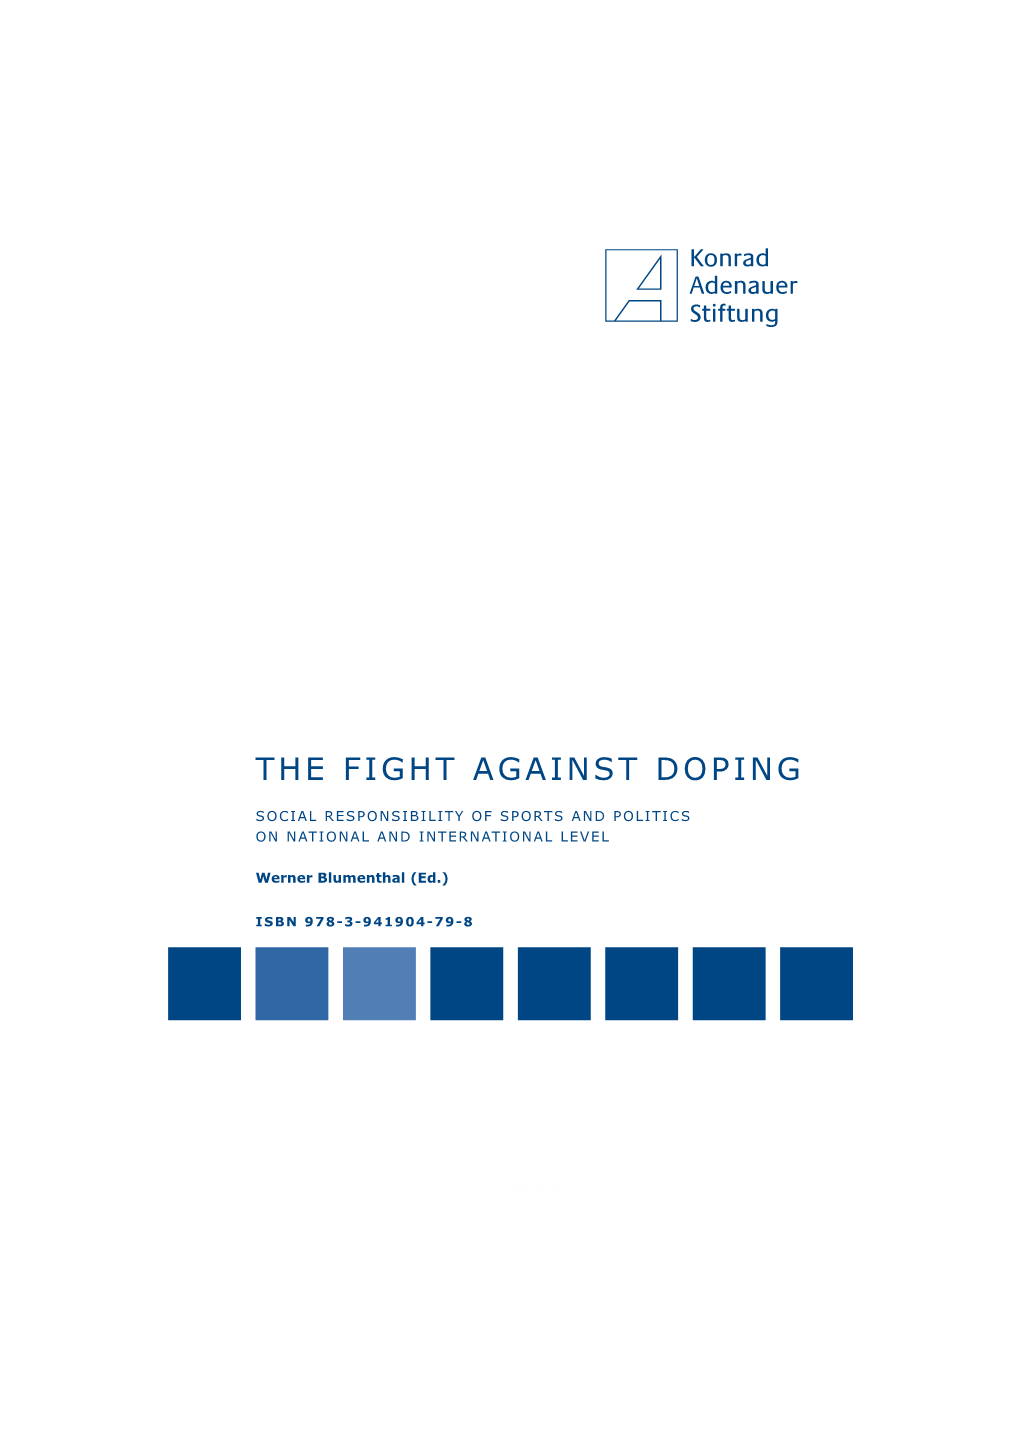 The Fight Against Doping